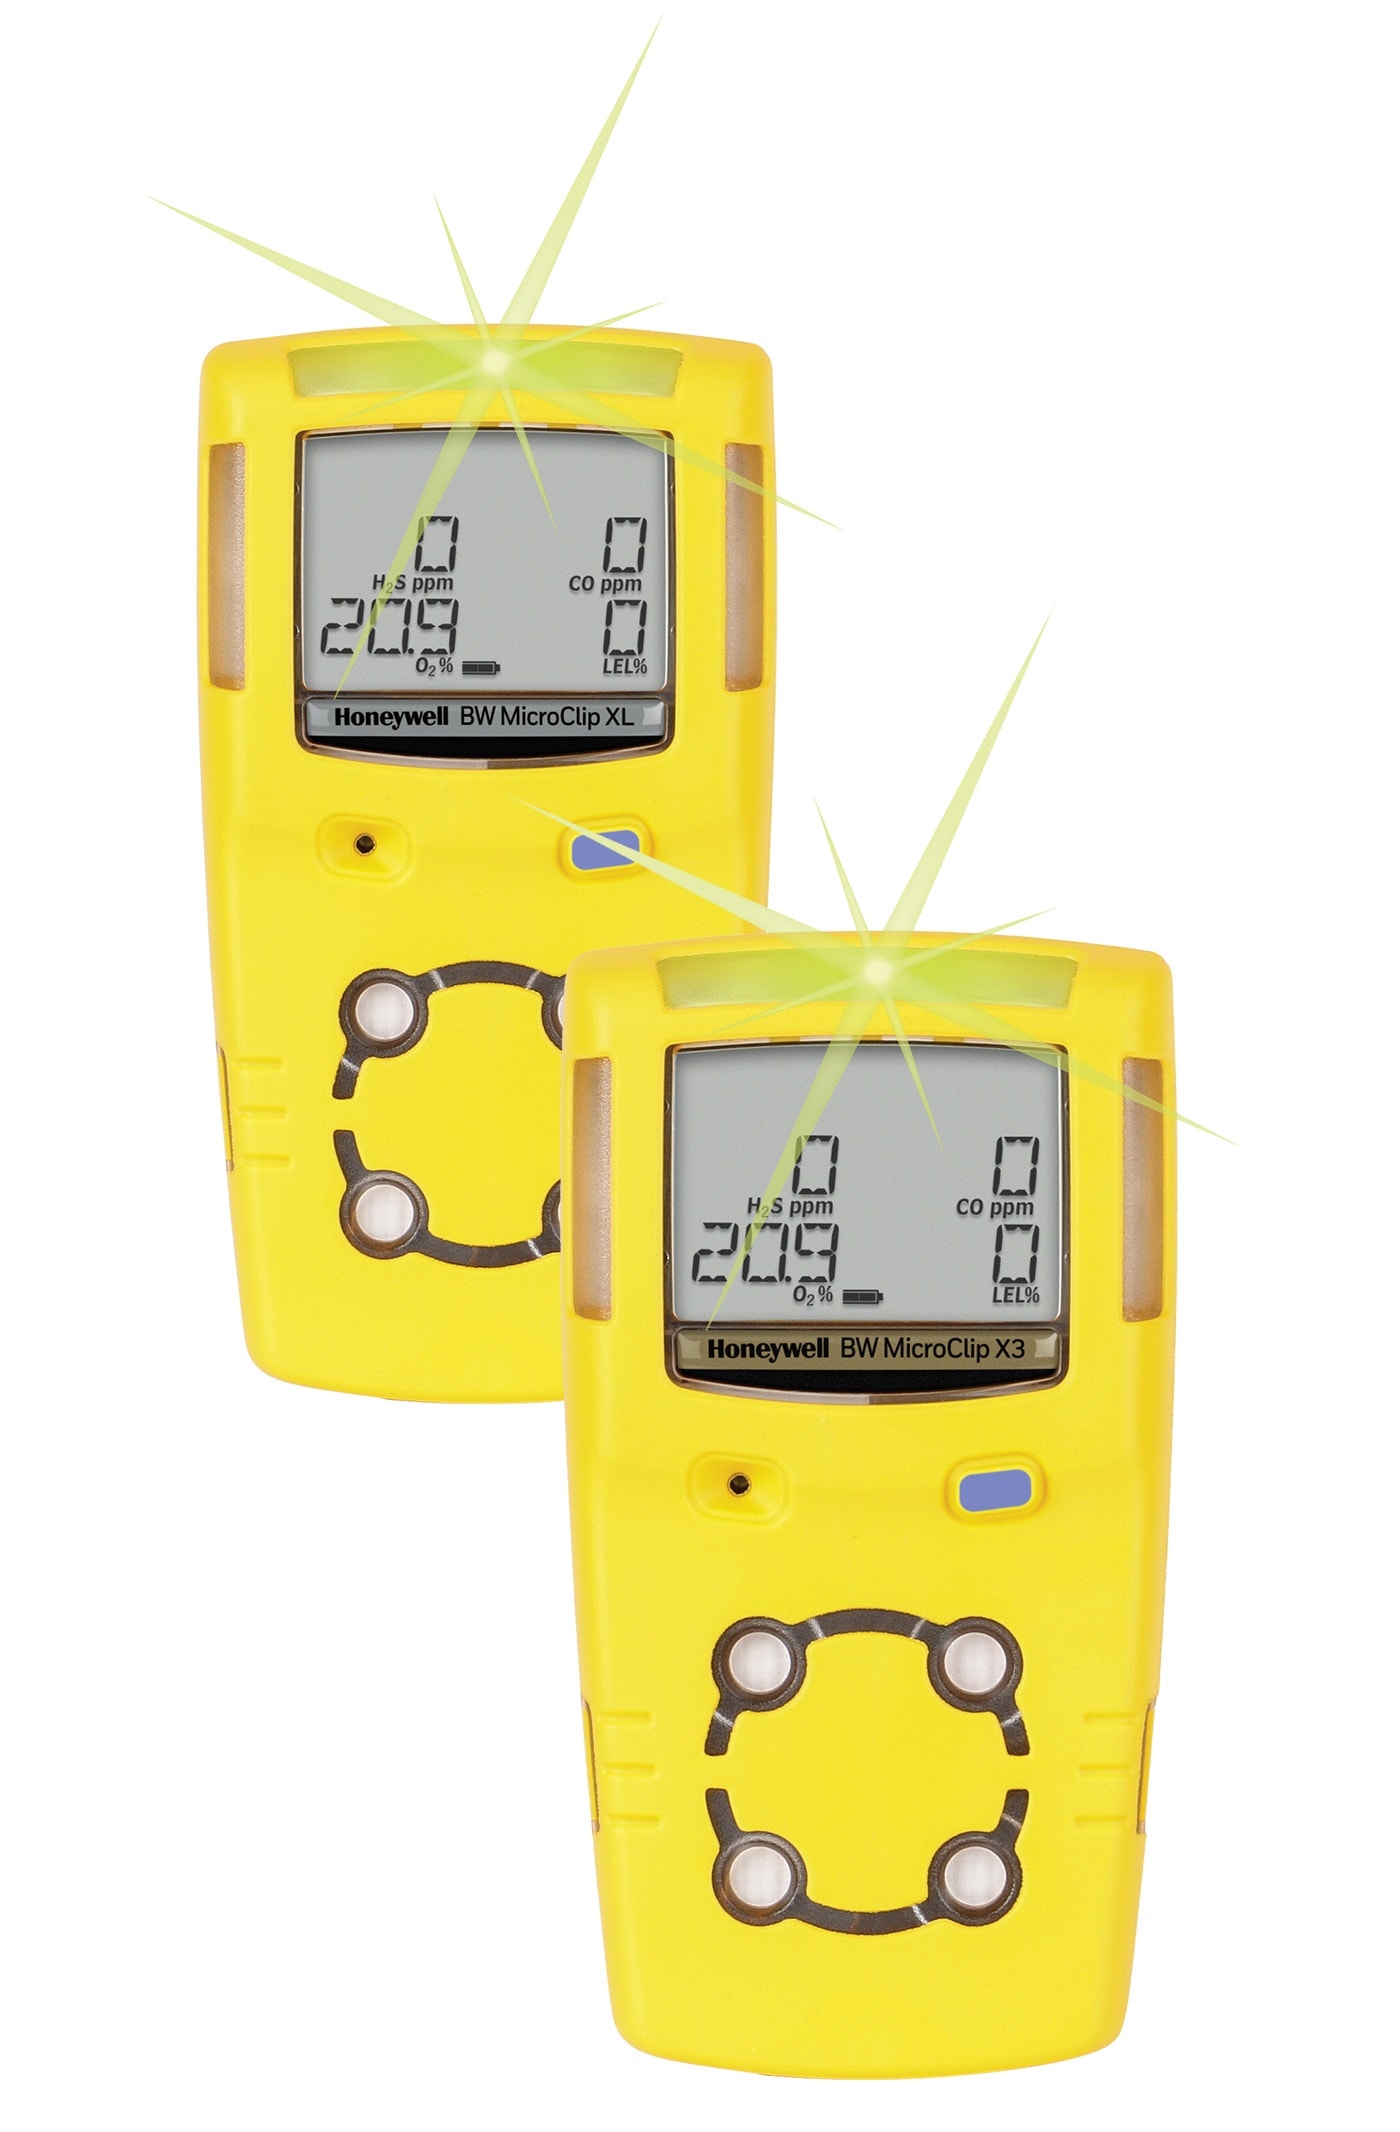 bh-4 four-in-one gas detector manual